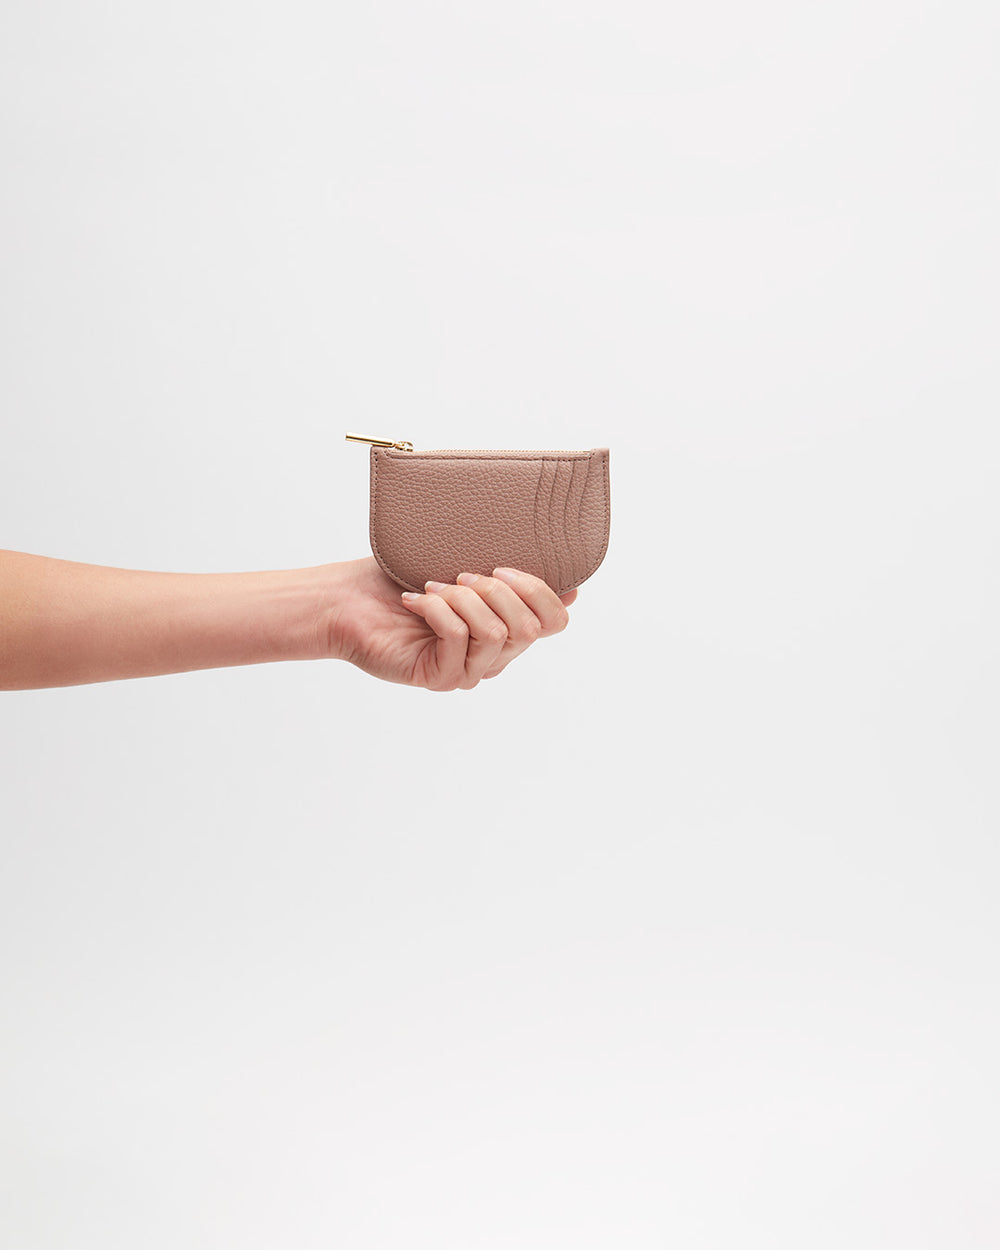 Hand holding a small purse